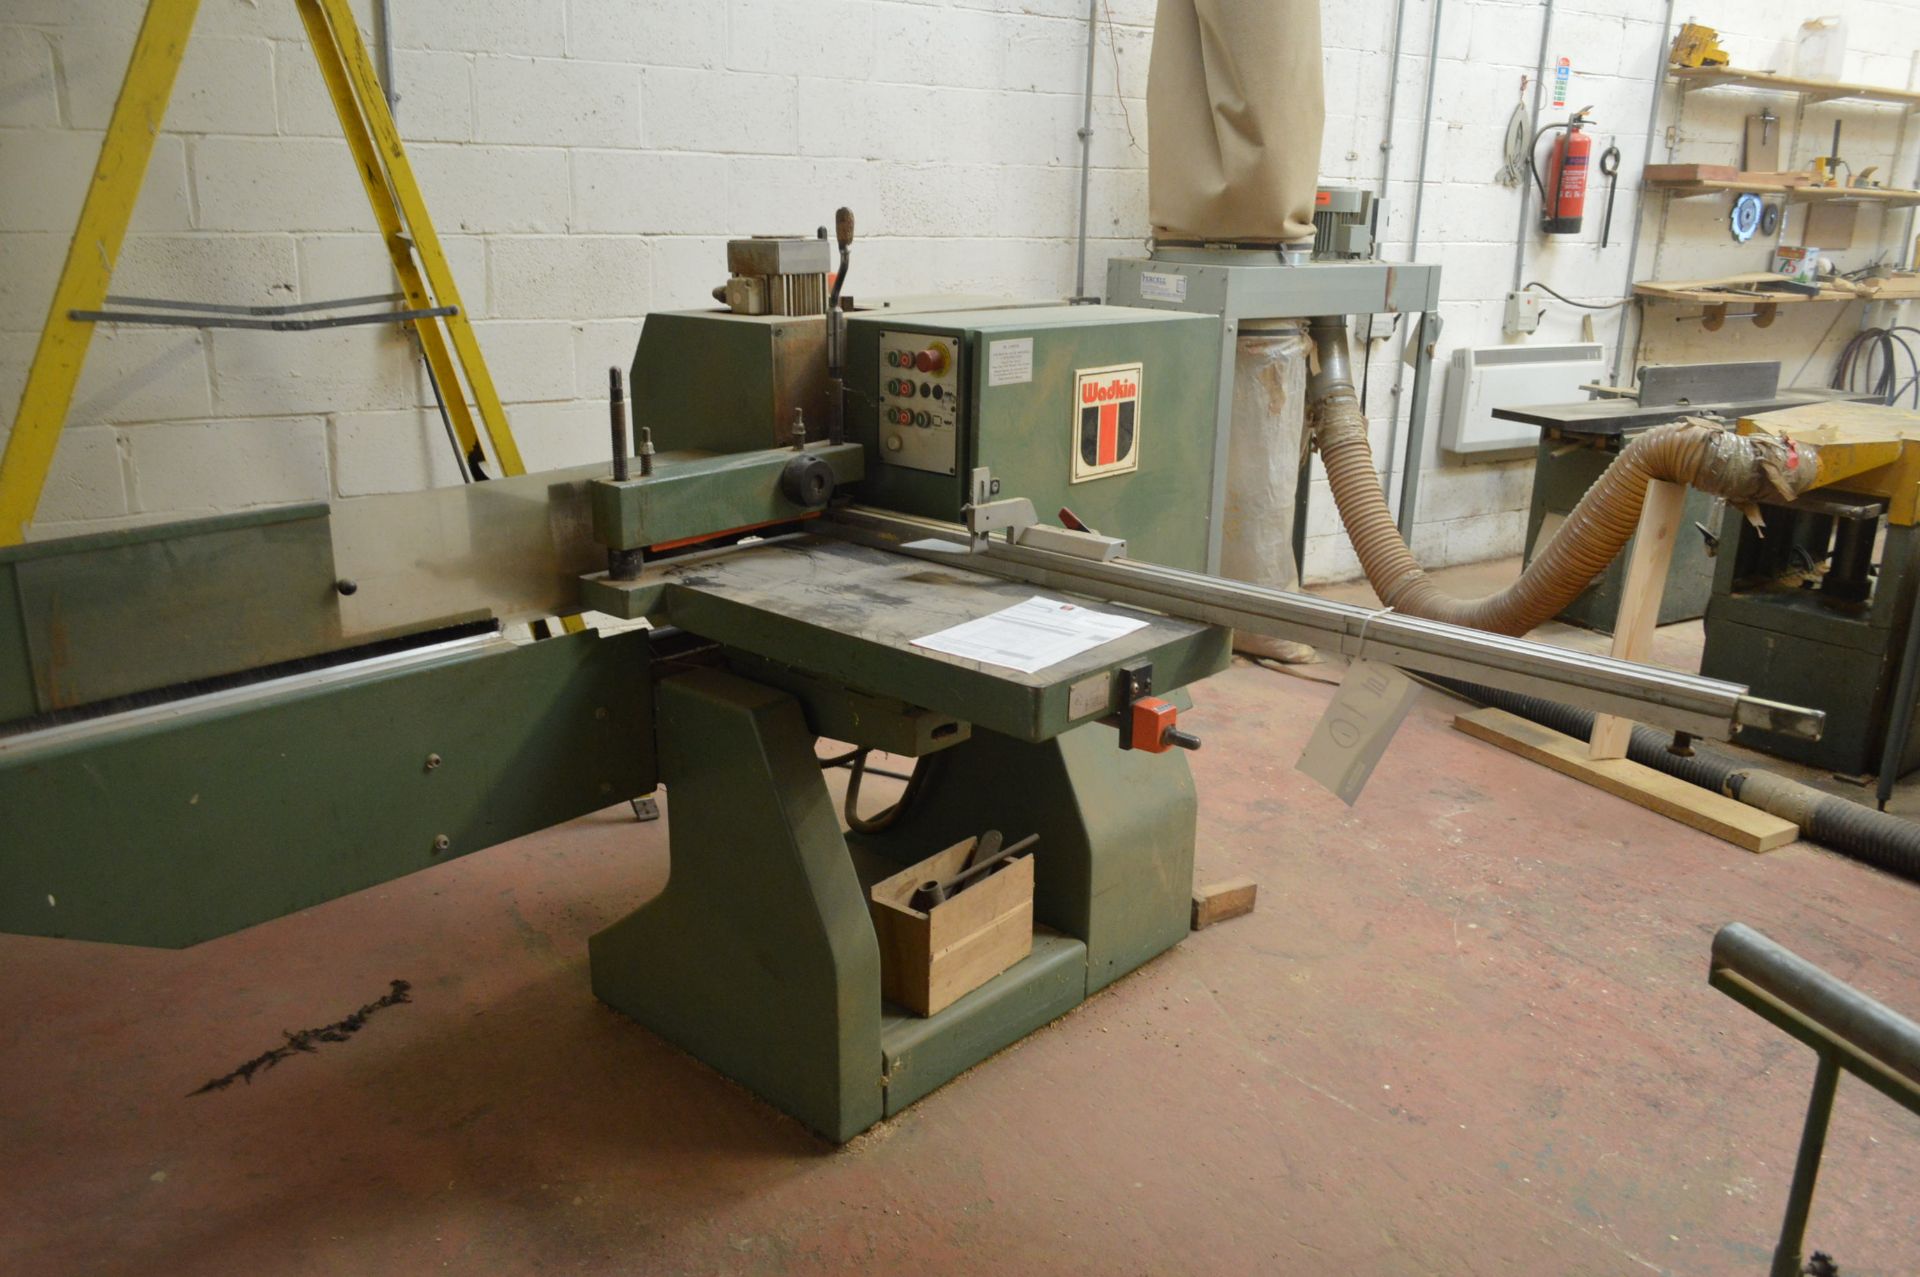 Wadkin SET SINGLE END TENONER, serial no. 90130, year of manufacture 1989, (Offered for sale on